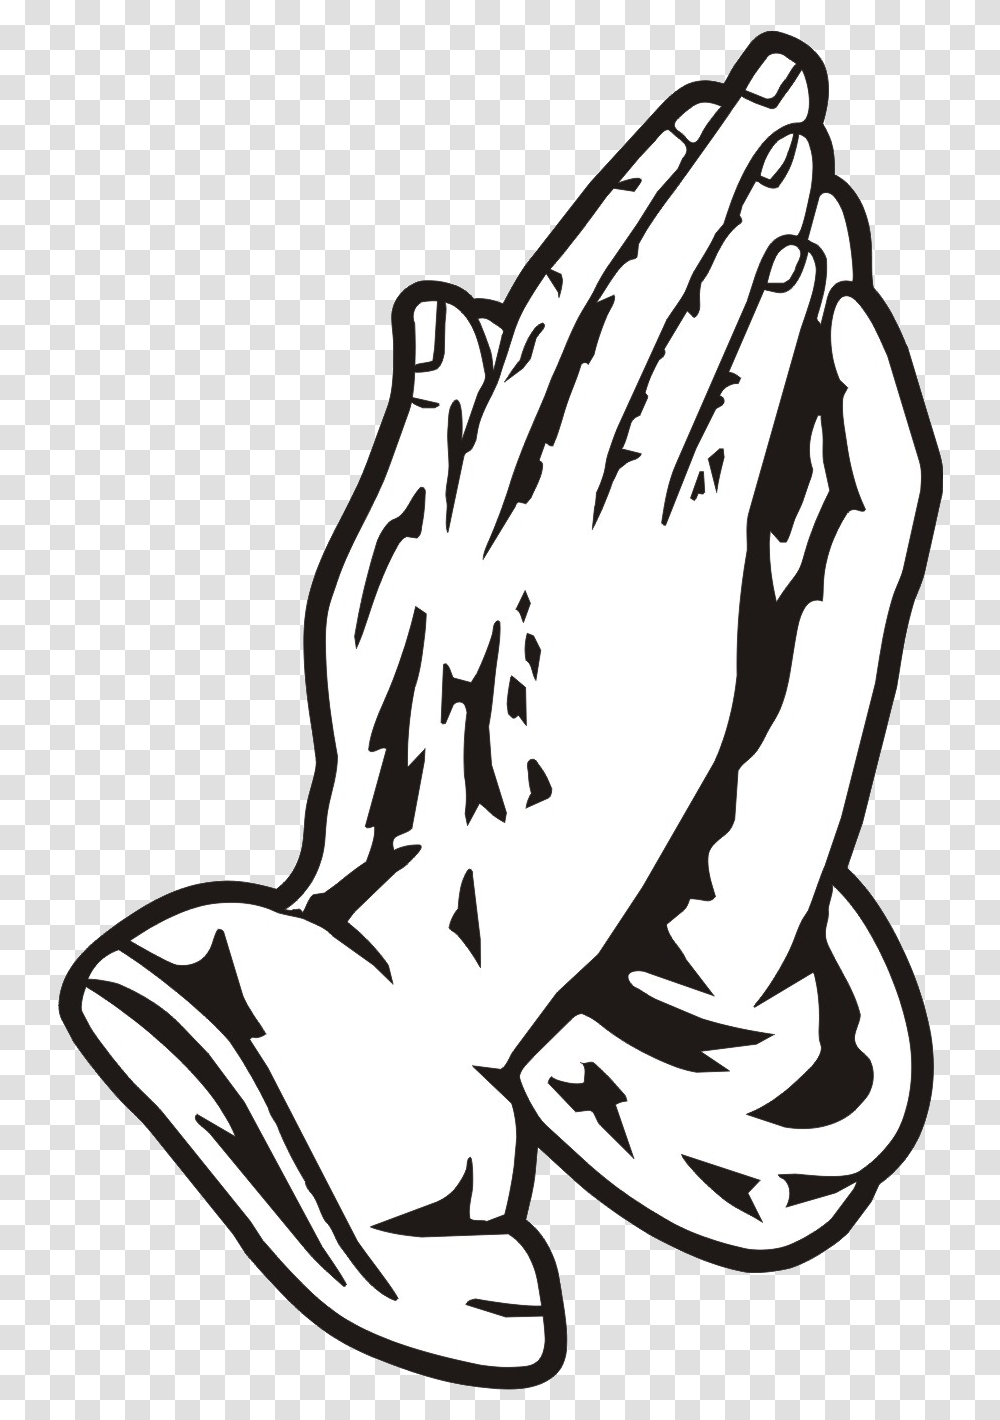 Praying Hands Images Free Download Praying Hands Black And White, Clothing, Apparel, Footwear, Boot Transparent Png